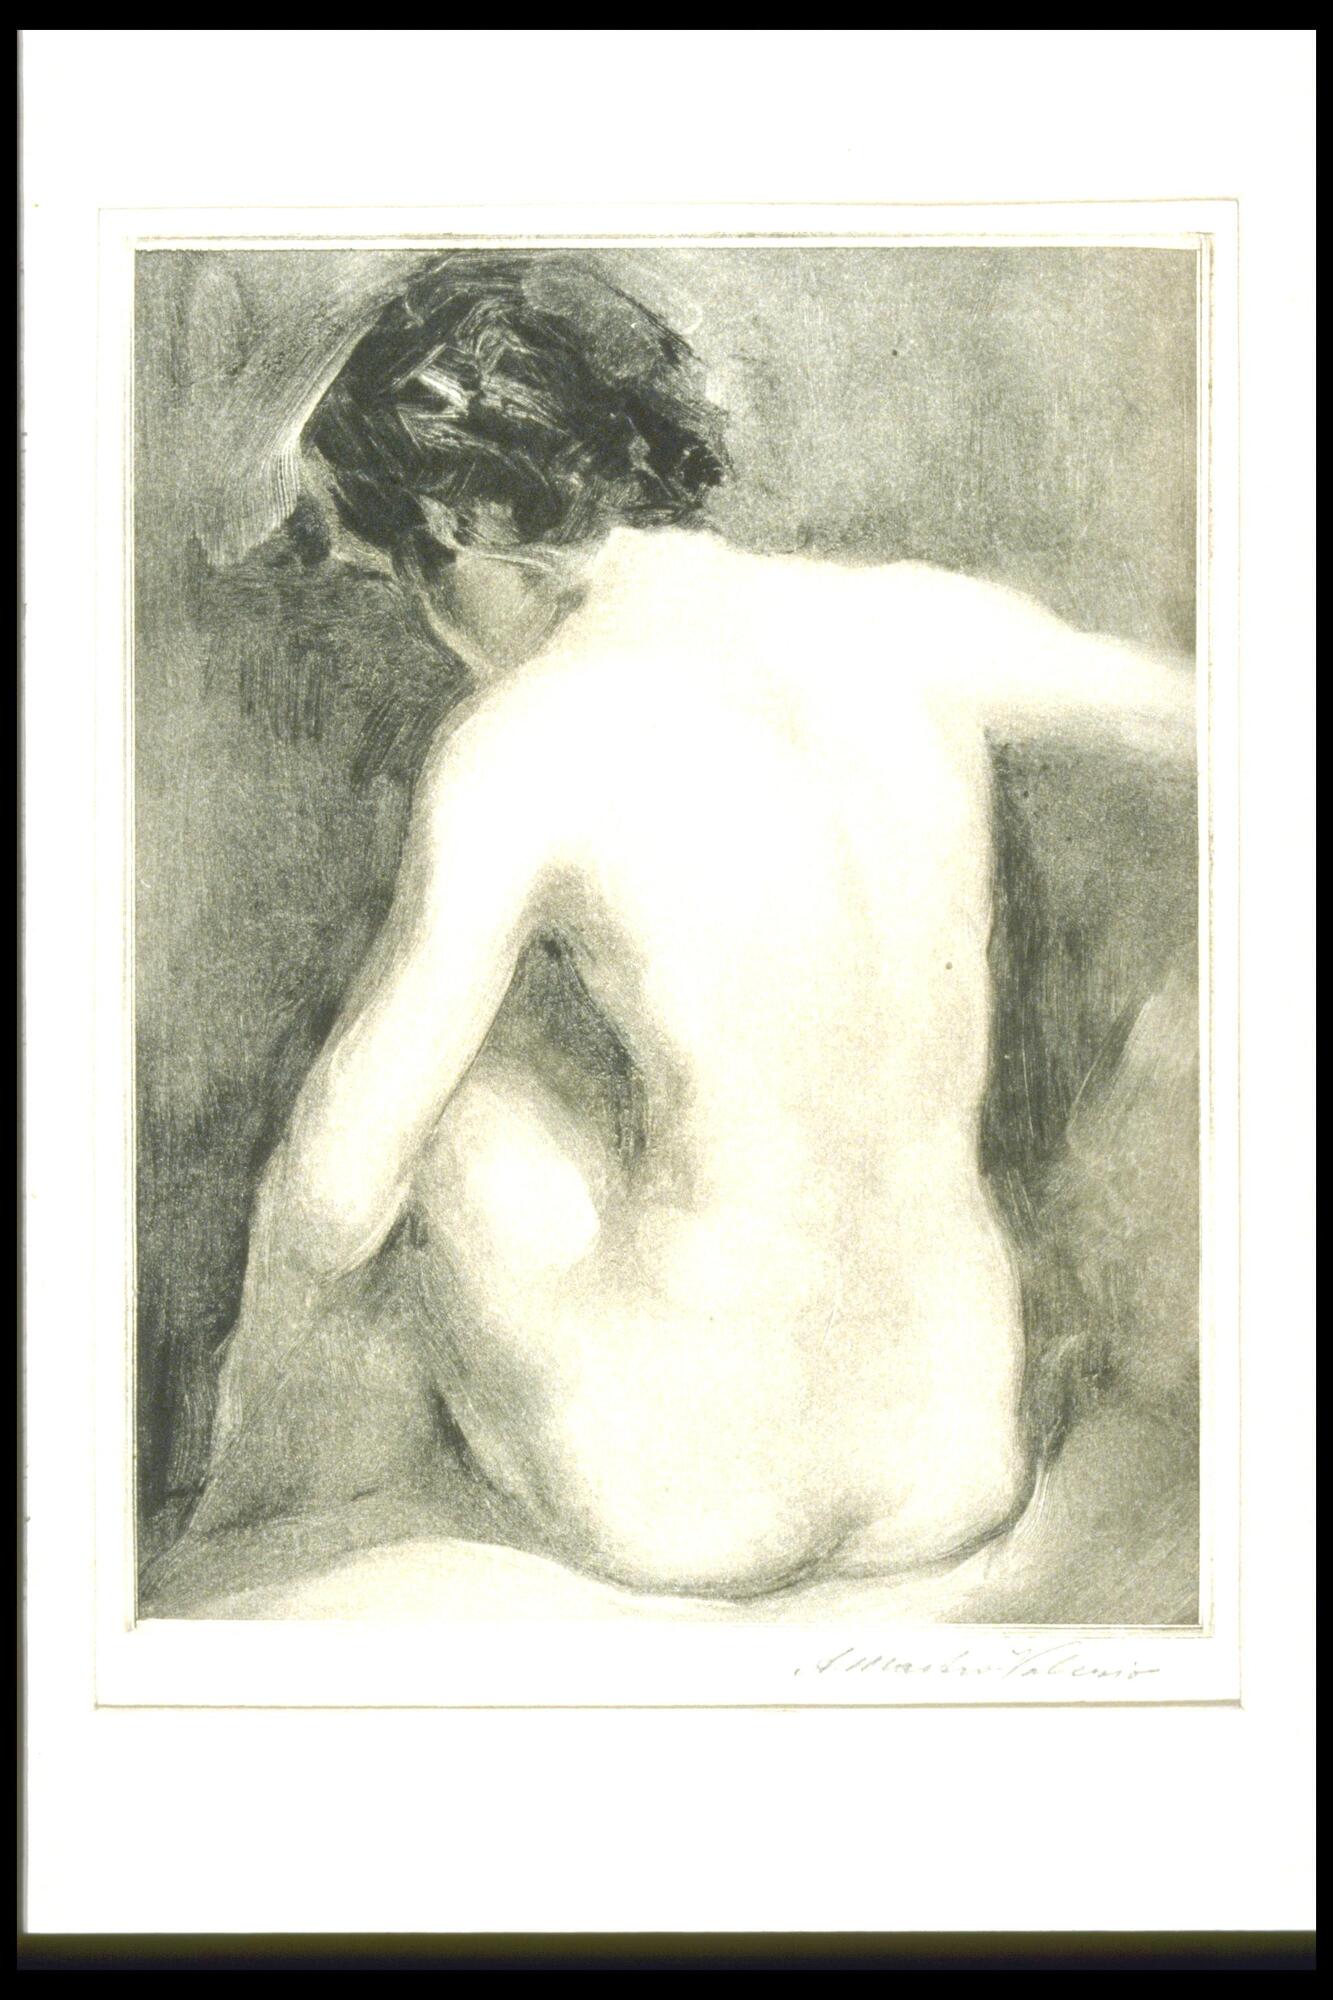 This monotype depicts the back of a nude woman. She is sitting down, and we can see her arms, part of her left leg and part of the left side of her face. The woman casts some dark shadows on the left and under her right arm.